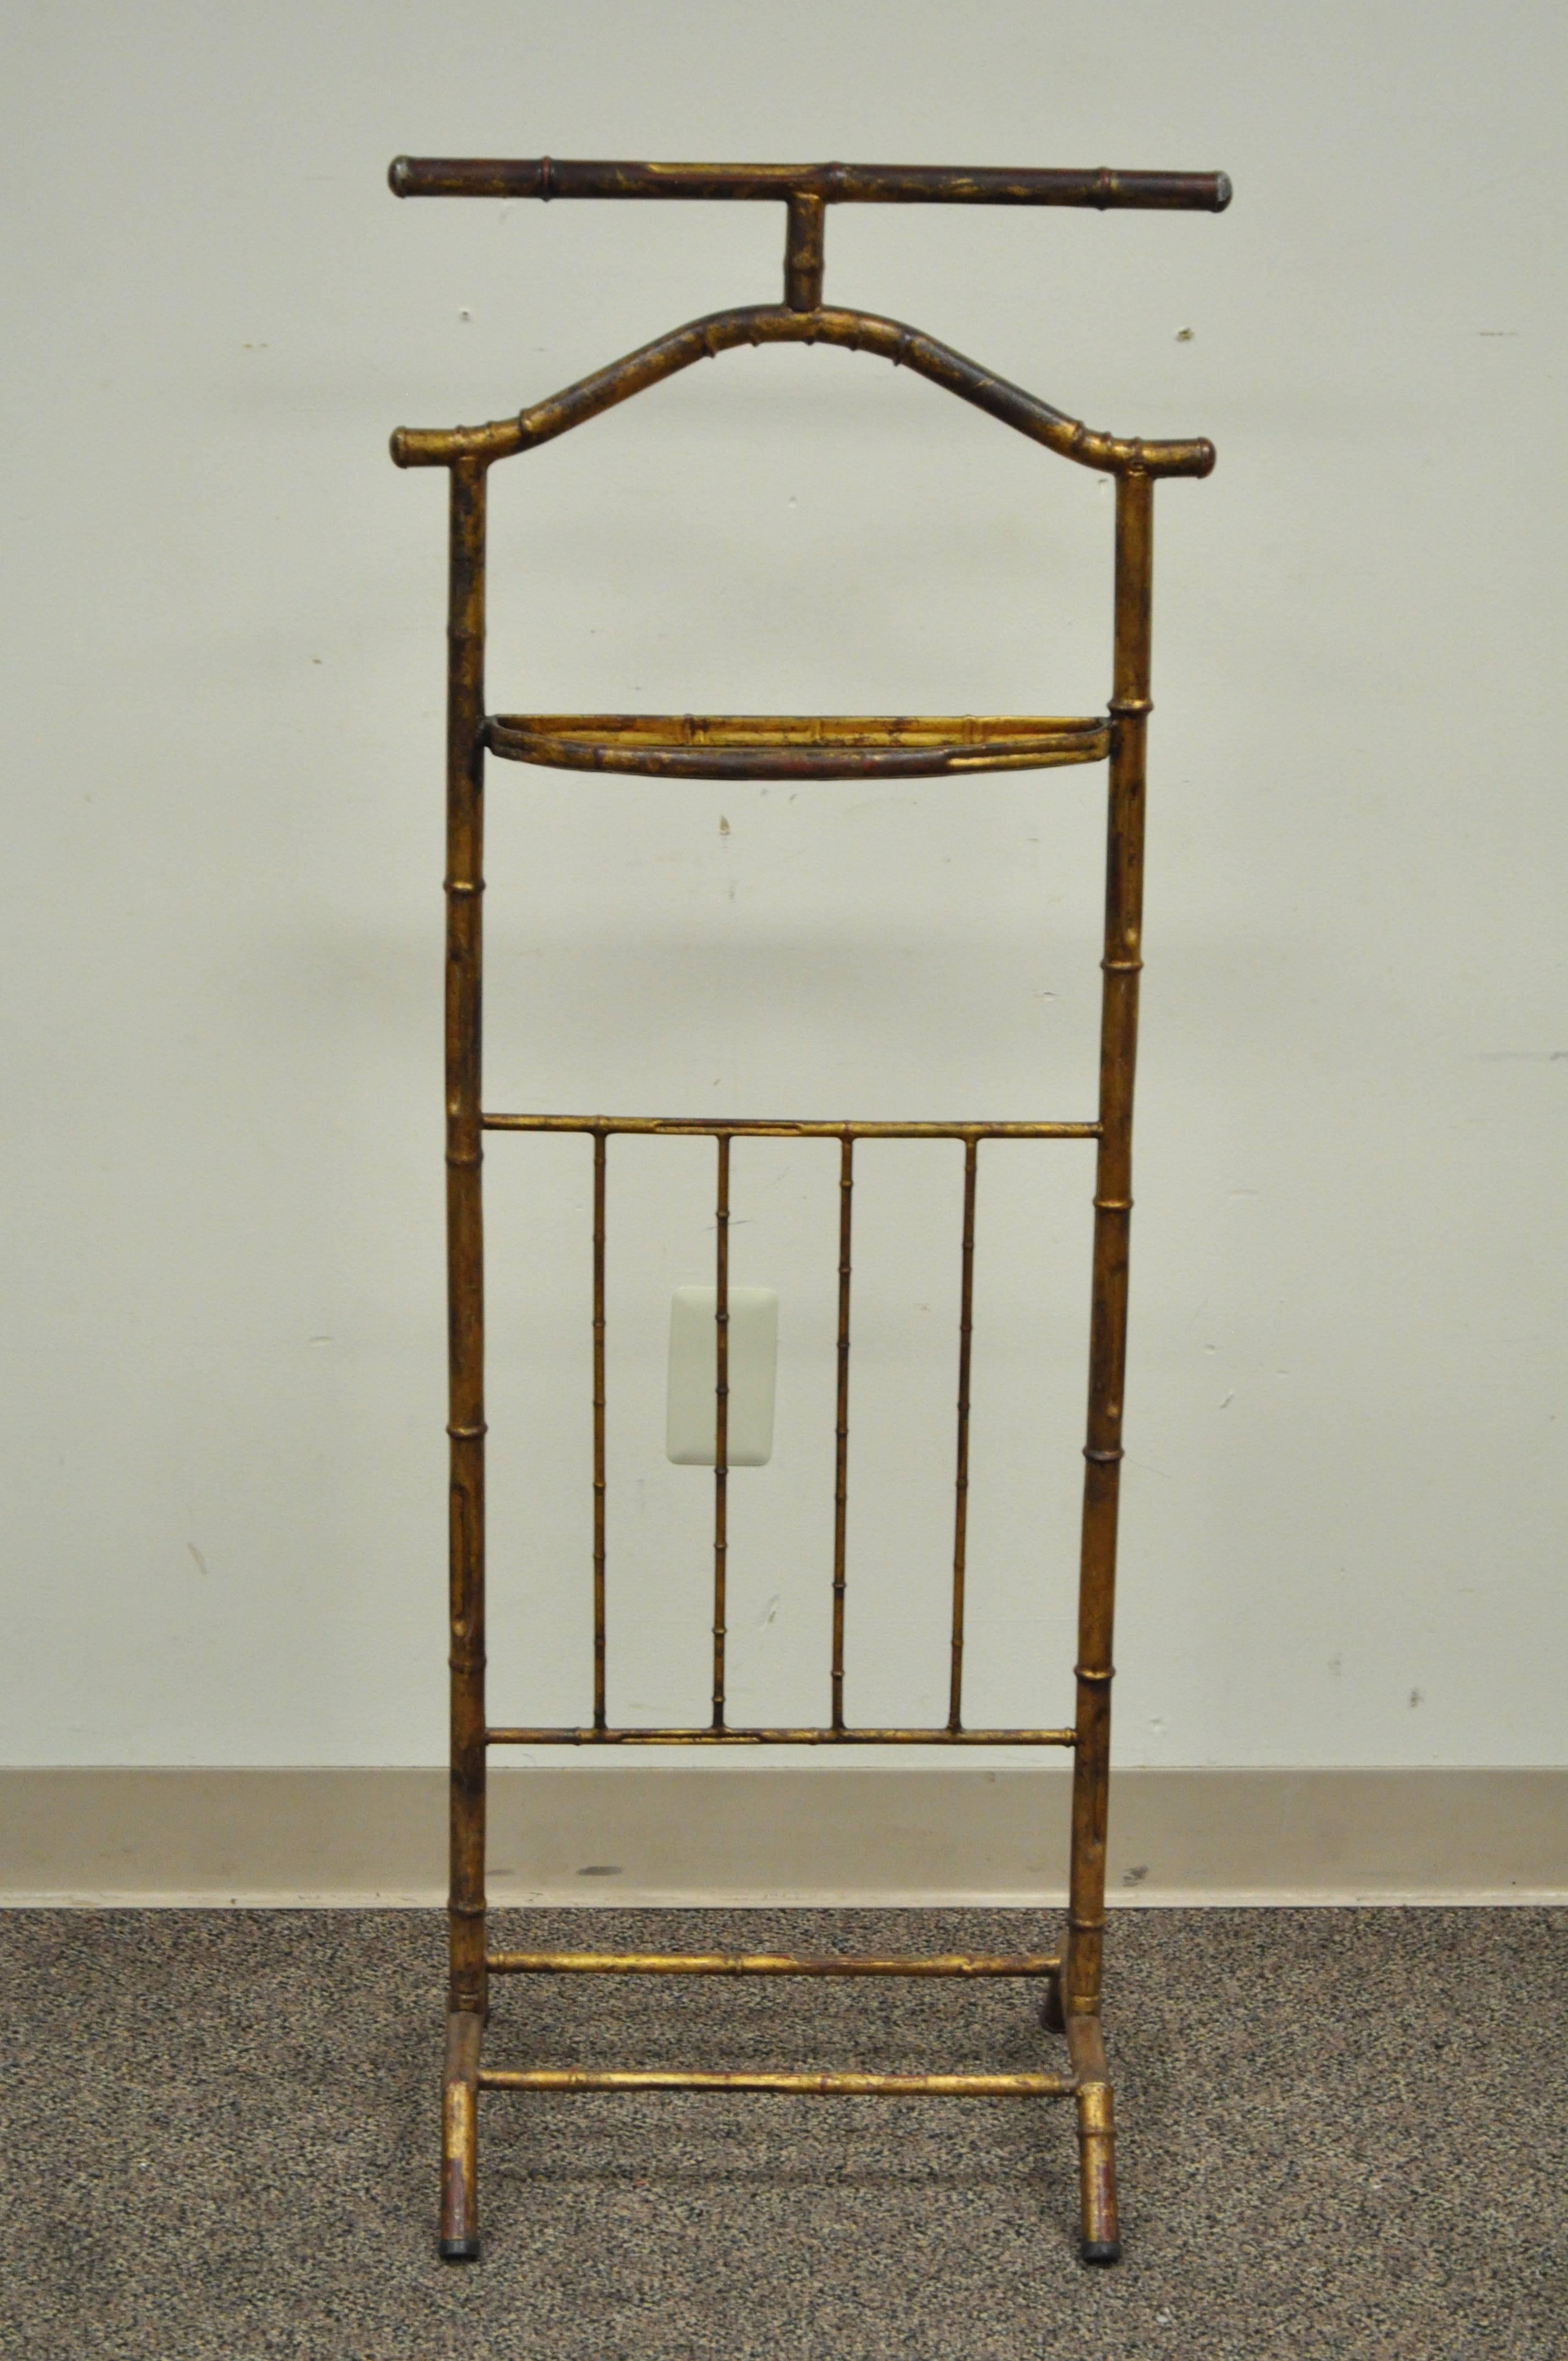 Vintage 1940s Italian faux bamboo frame tole metal (iron) gold-leaf clothing valet.